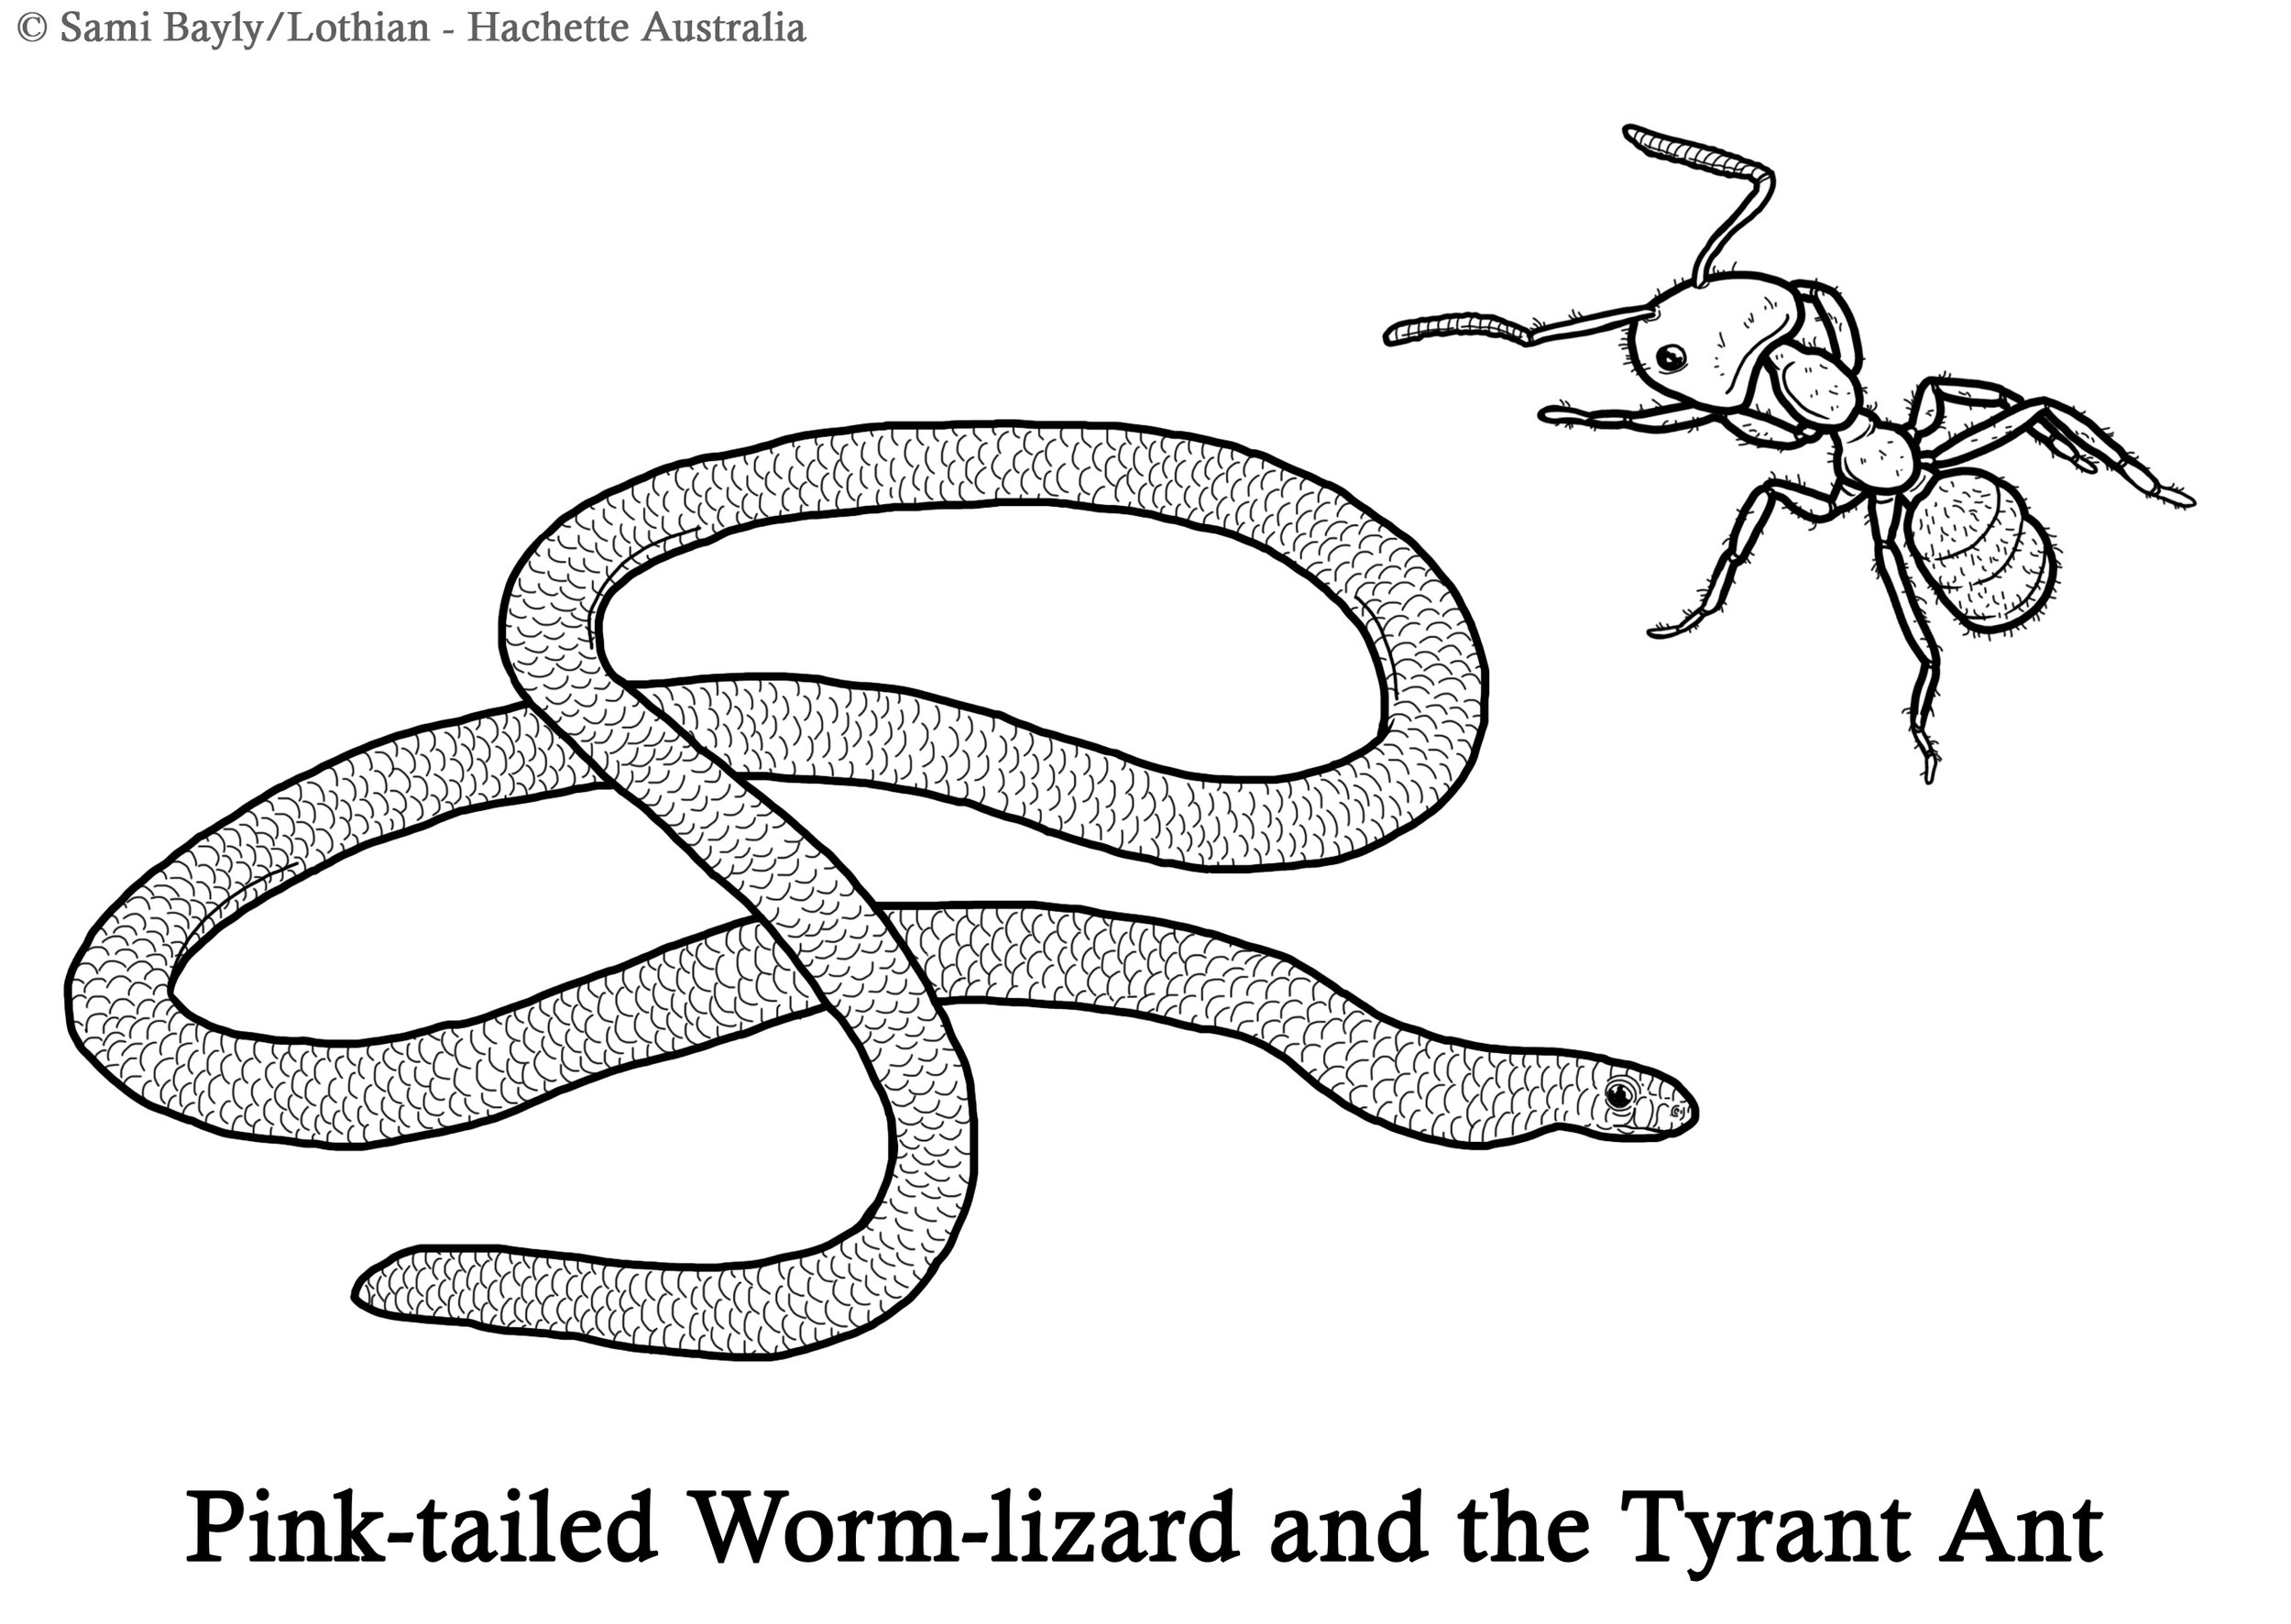 Pink-tailed Worm-lizard and the Tyrant Ant Line Drawing.jpg